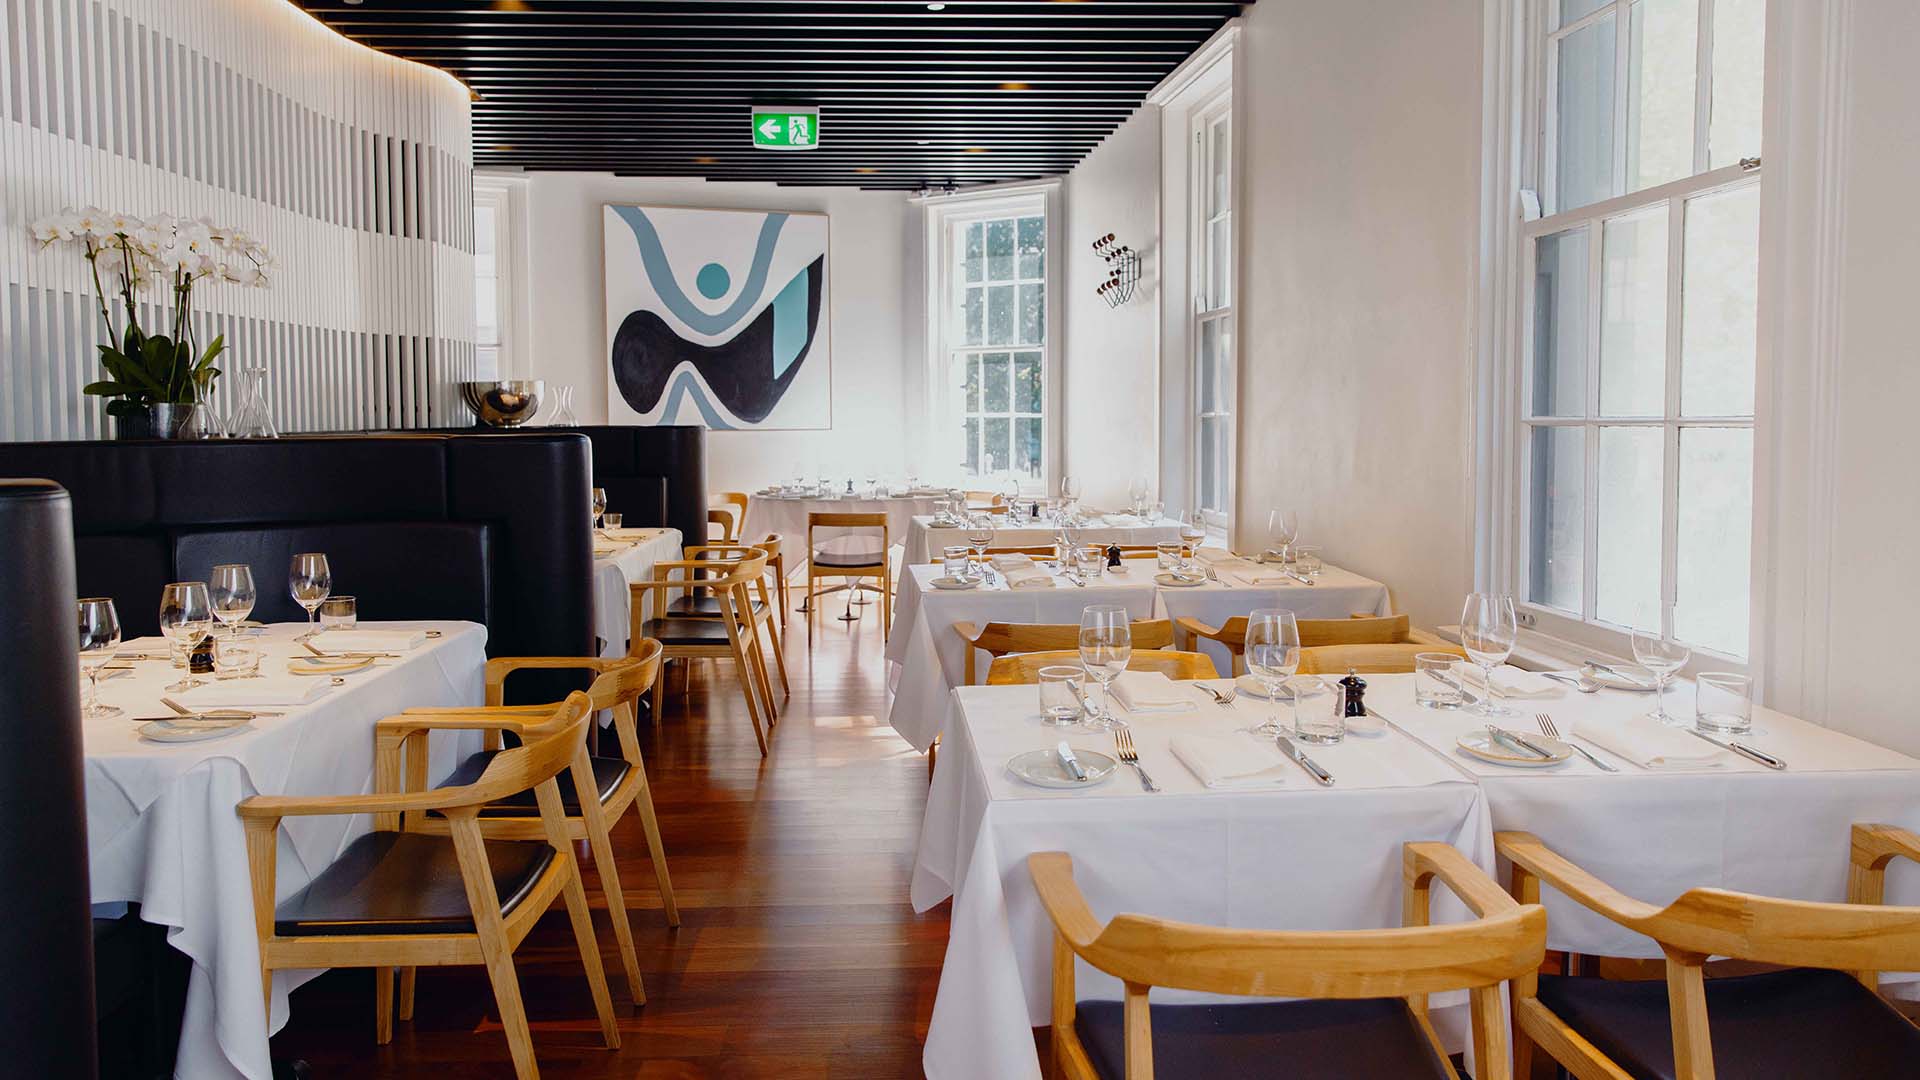 Sydney Collective's Eight Venues Will Match NSW's New Dining Out Vouchers When They Come Into Effect